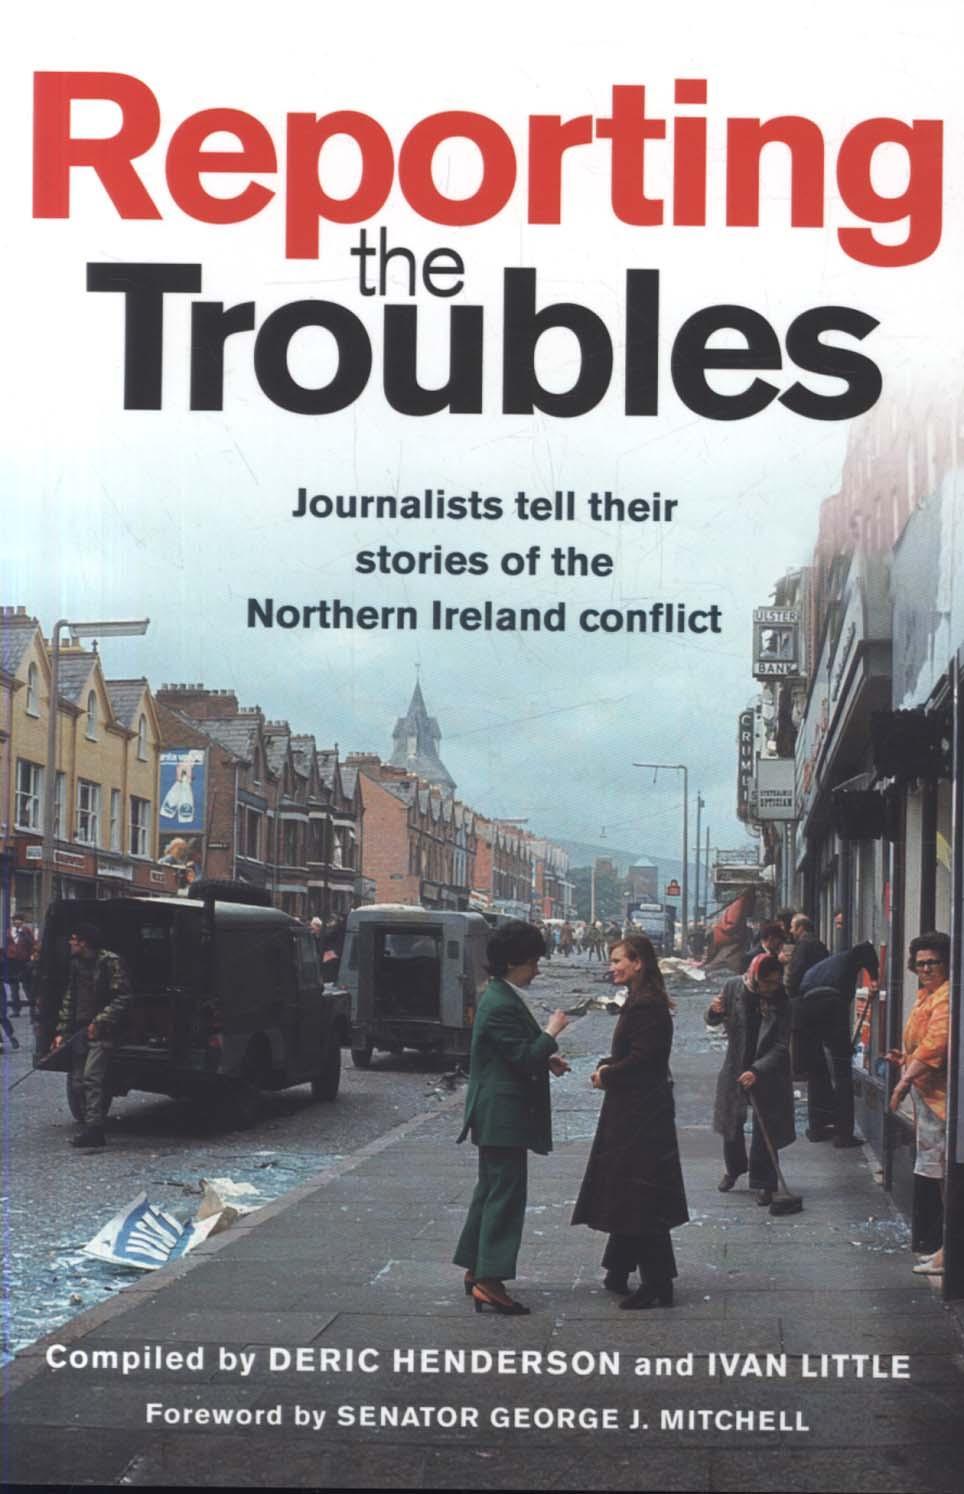 Reporting the Troubles